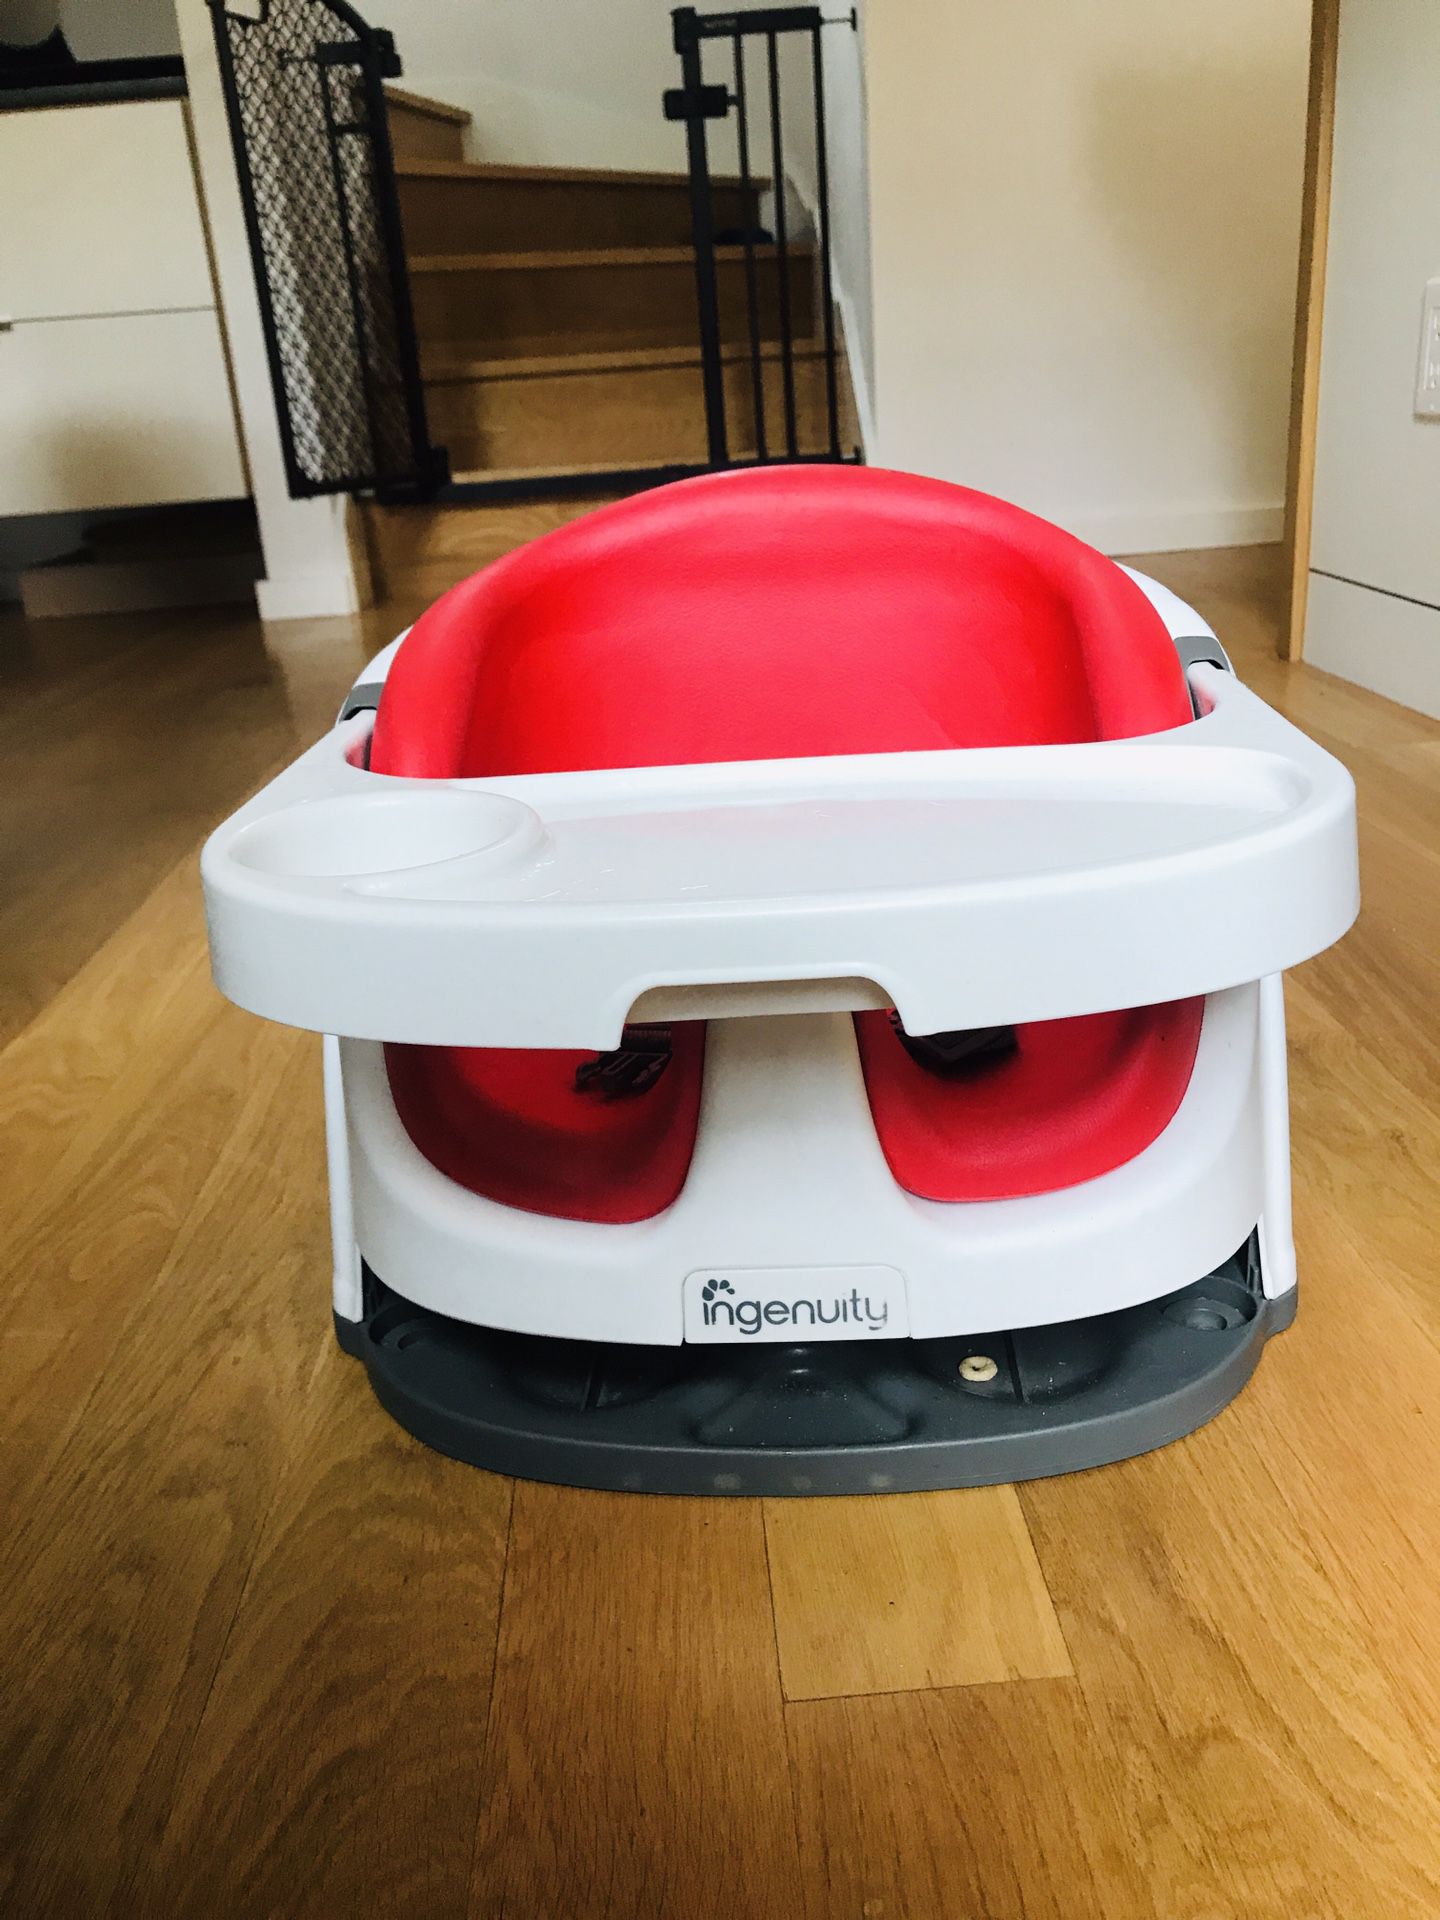 Booster seat bumbo chair